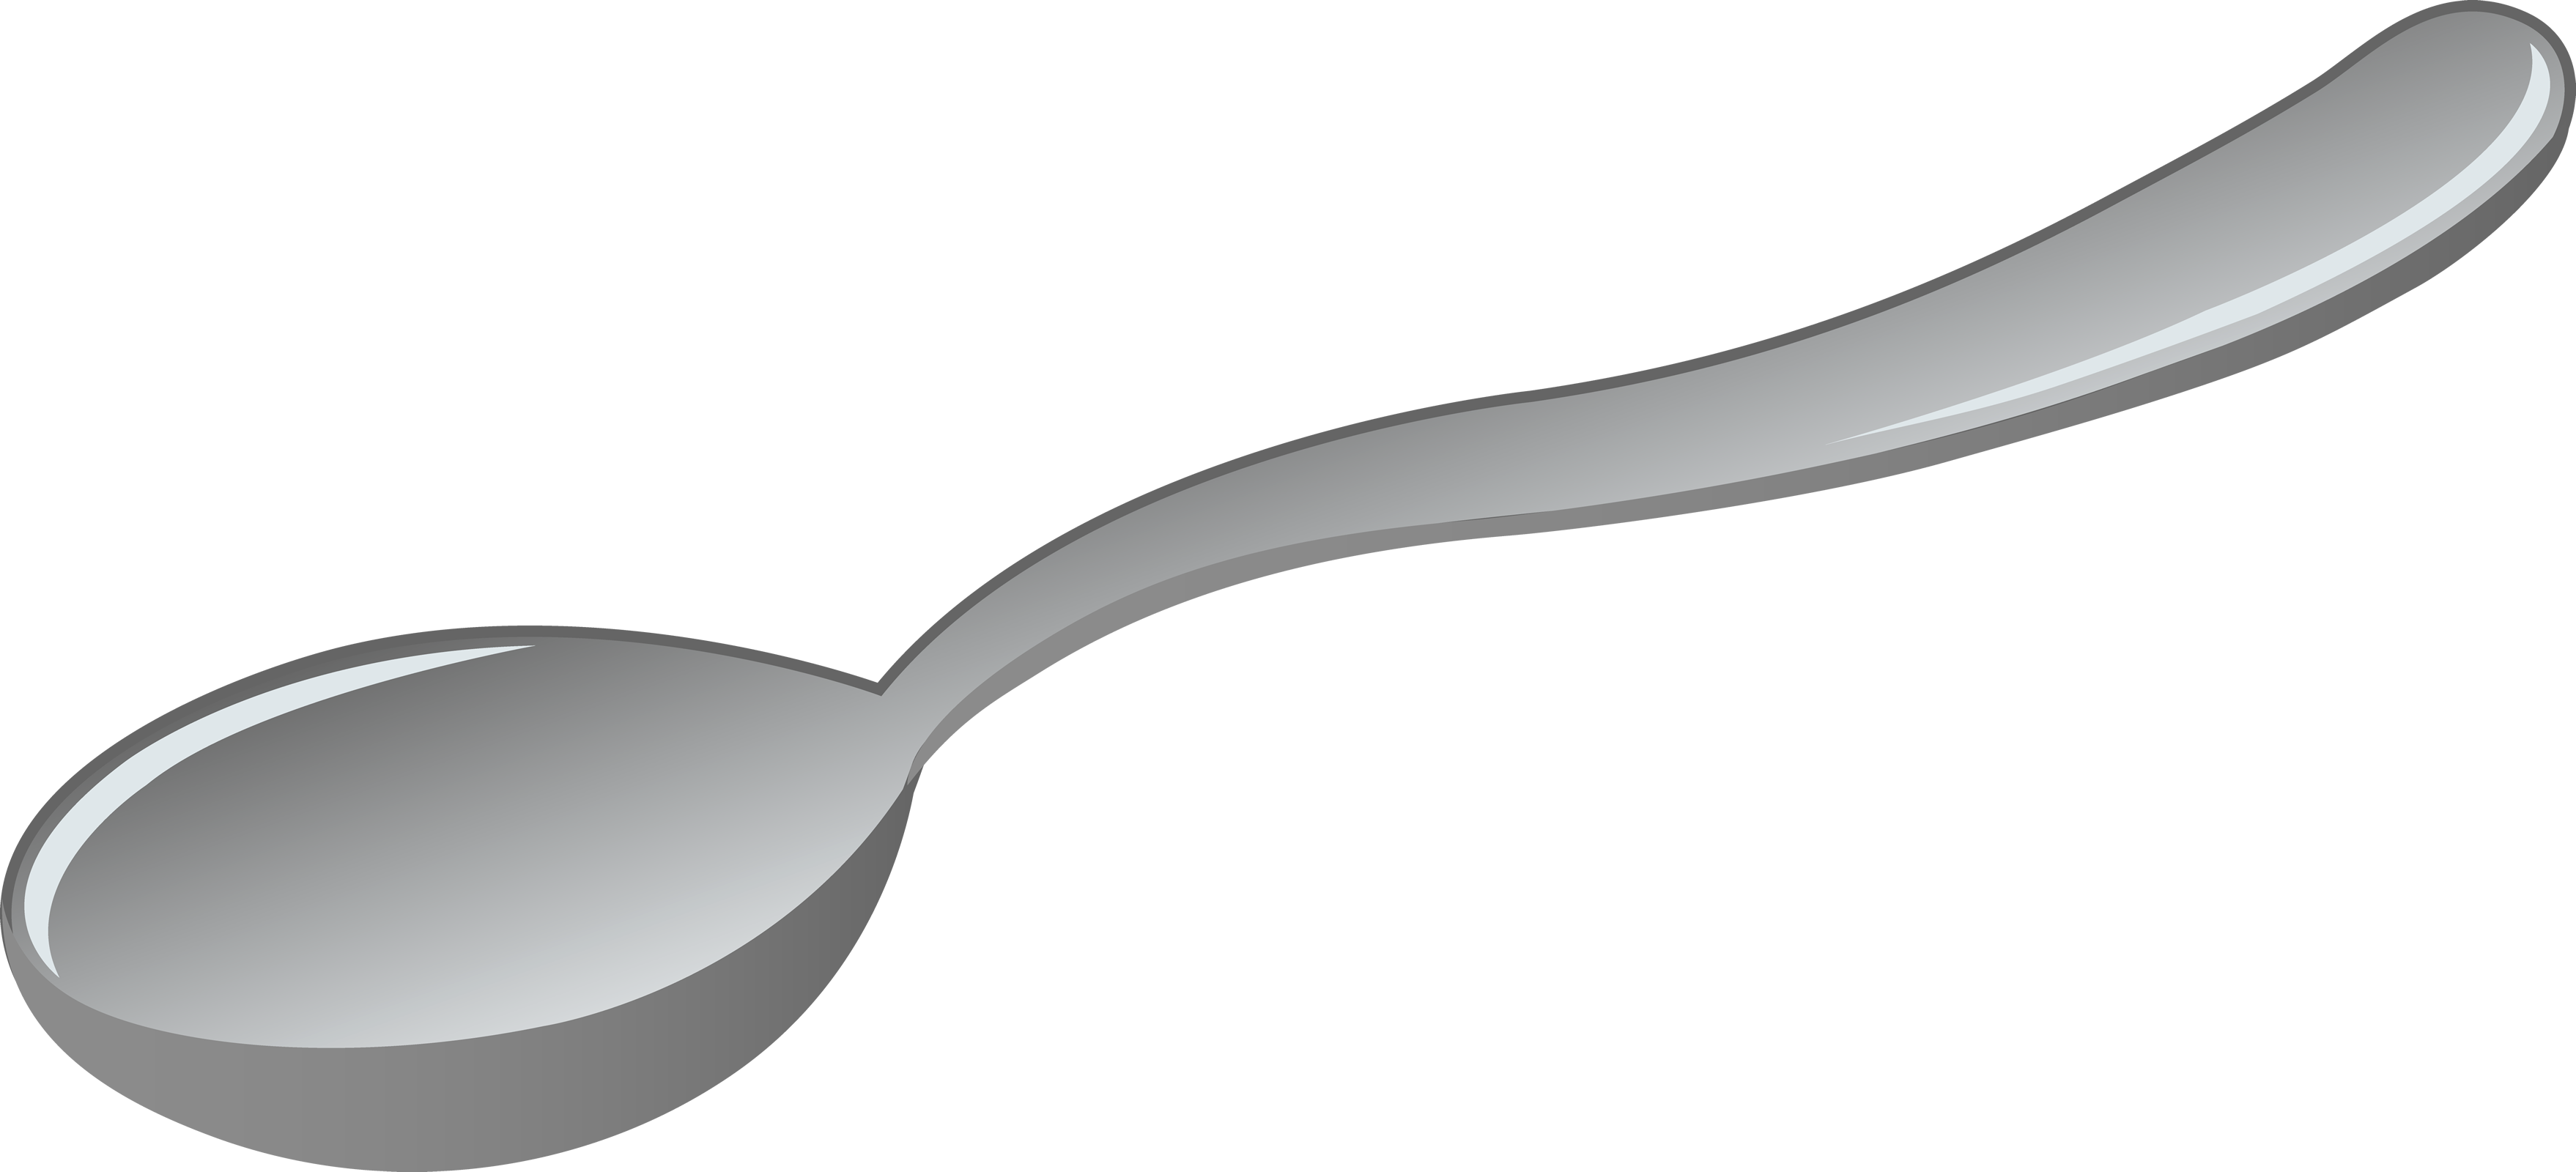 Spoon Png Image - Spoon, Transparent background PNG HD thumbnail